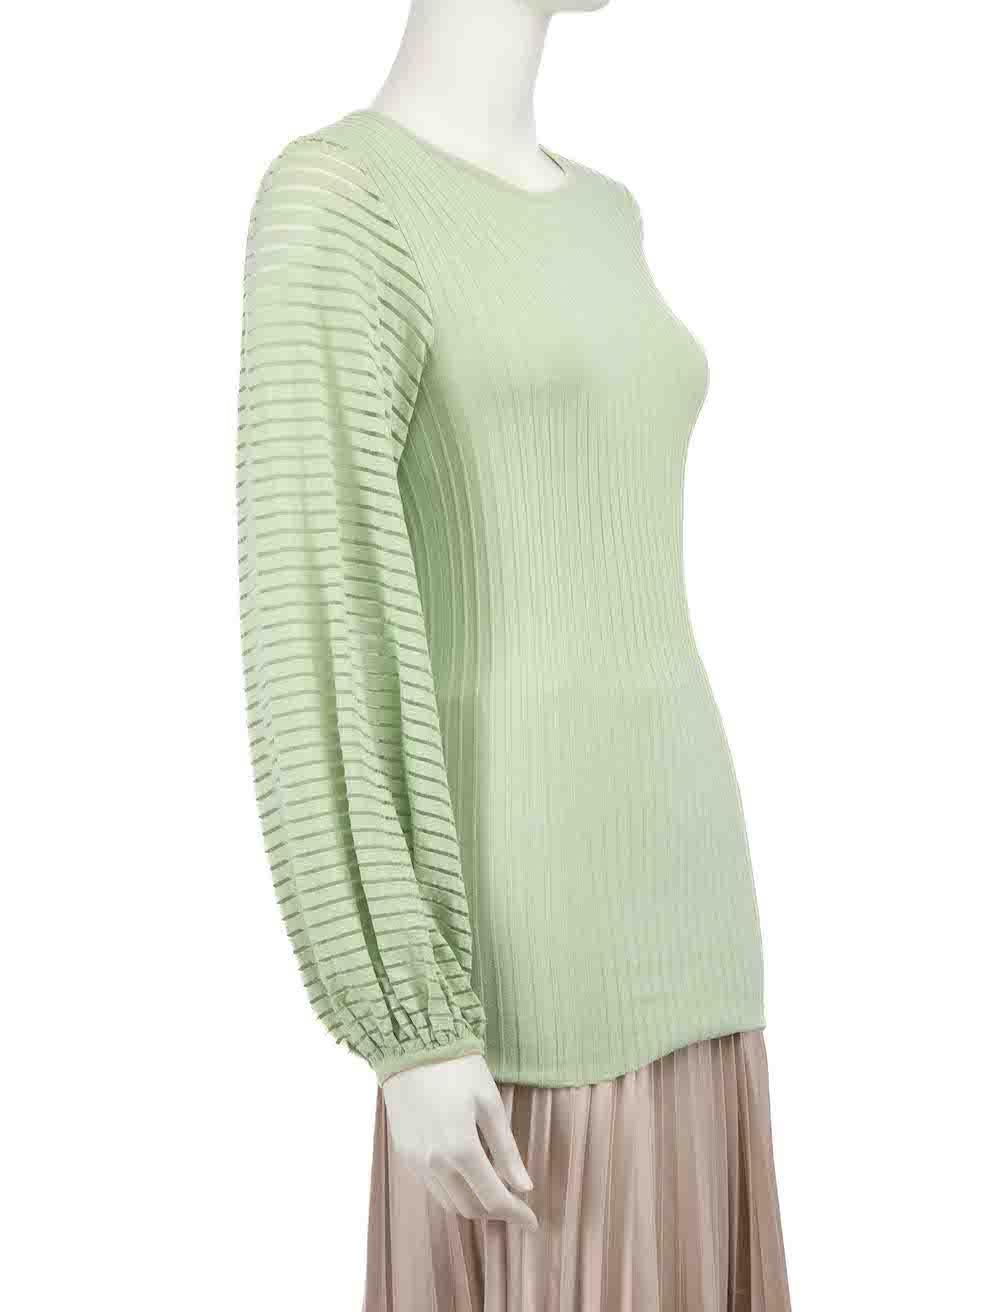 CONDITION is Very good. Minimal wear to top is evident. Minimal wear with the size label having become detached and the composition label is missing on this used Roksanda designer resale item.
 
 Details
 Green
 Synthetic
 Long sleeves top
